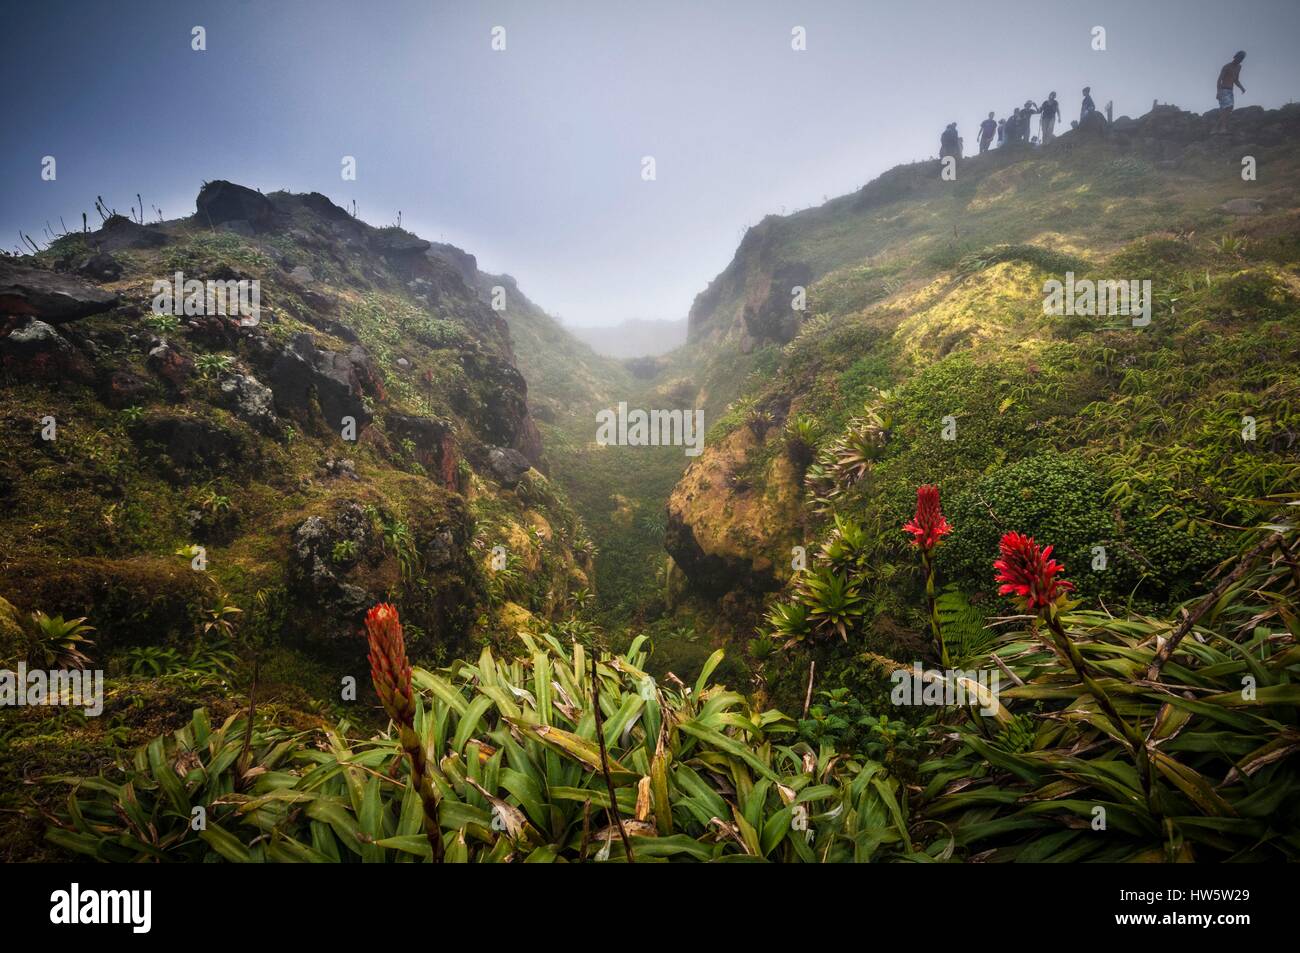 France, Guadeloupe (French West Indies), Basse Terre, Saint Claude, La Soufriere, Leading pineapple red mountain Pitcairnia bifrons, a plant of the family of native bromeliads Lesser Antilles here in 1467 m above sea level at the top fogged La Soufriere, Nicknamed the vie madanm in Guadeloupean Creole or the old lady in French, La Soufriere is an active volcano located in the national park Stock Photo